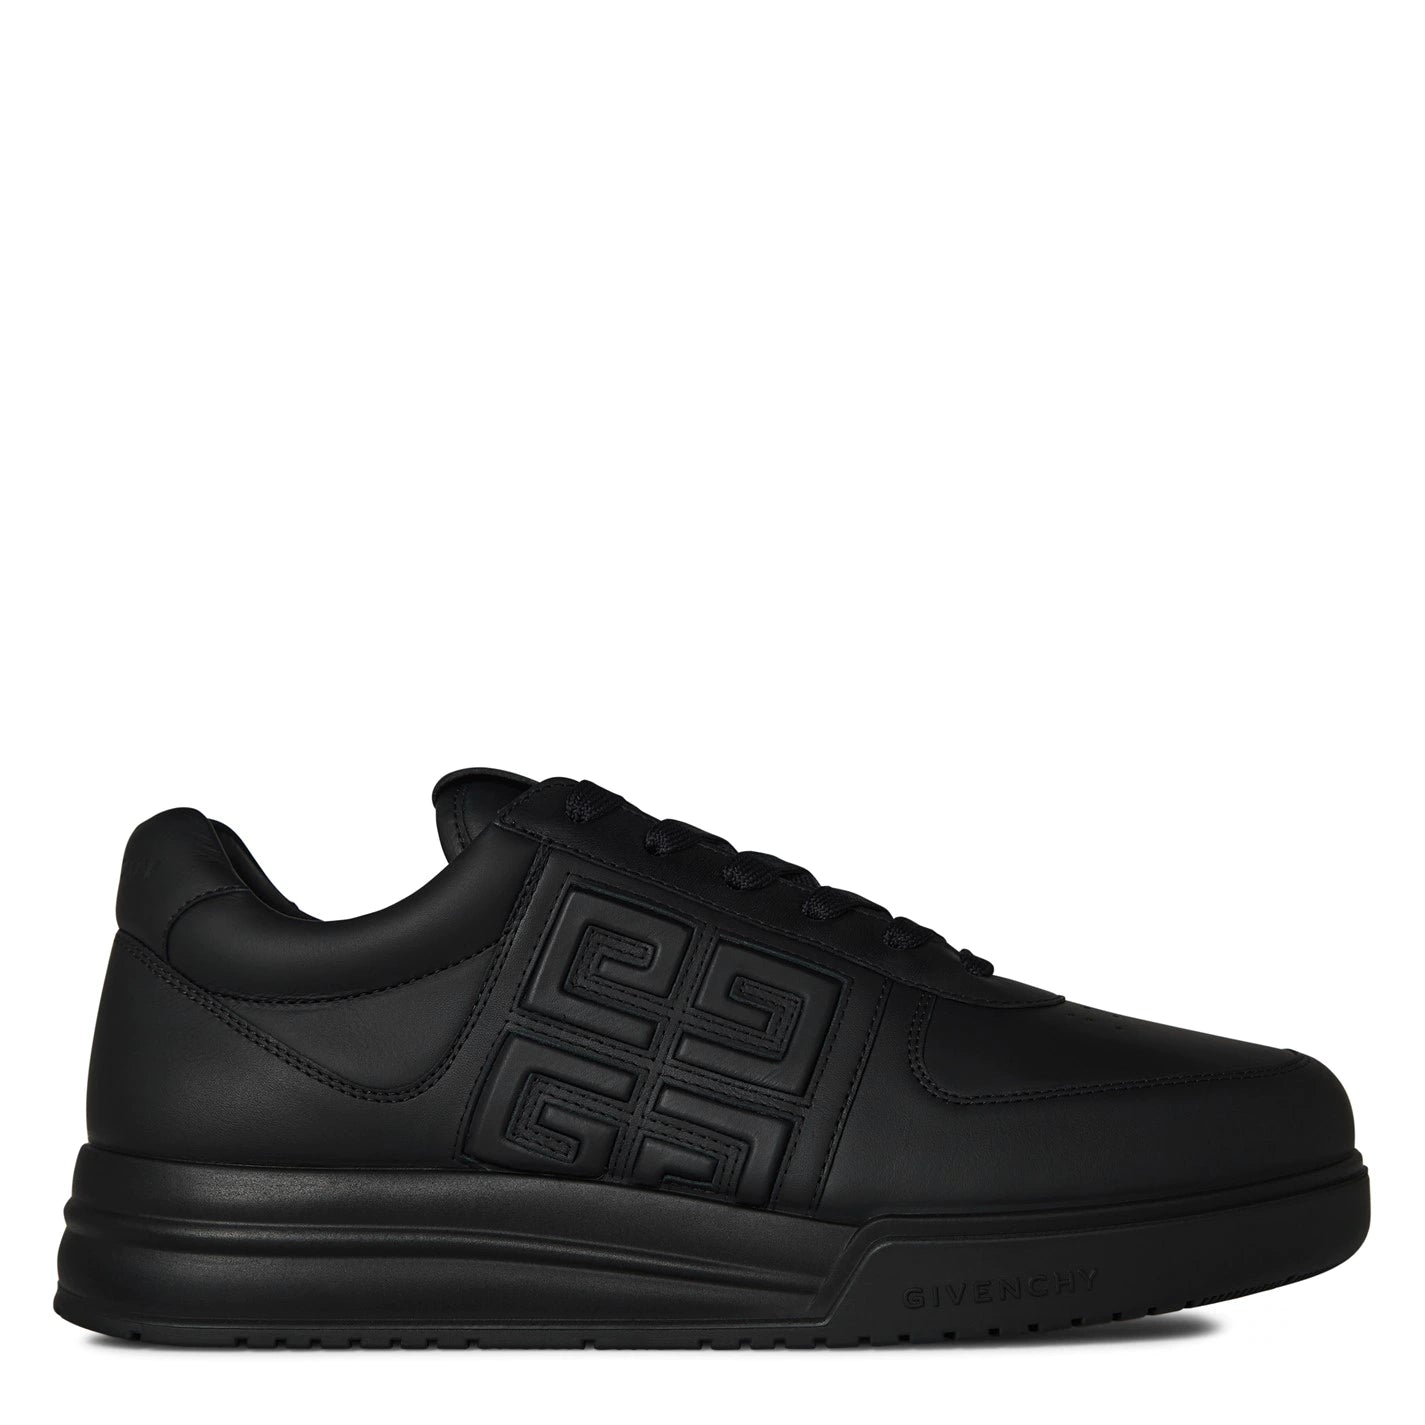 Givenchy G4 Trainers Black